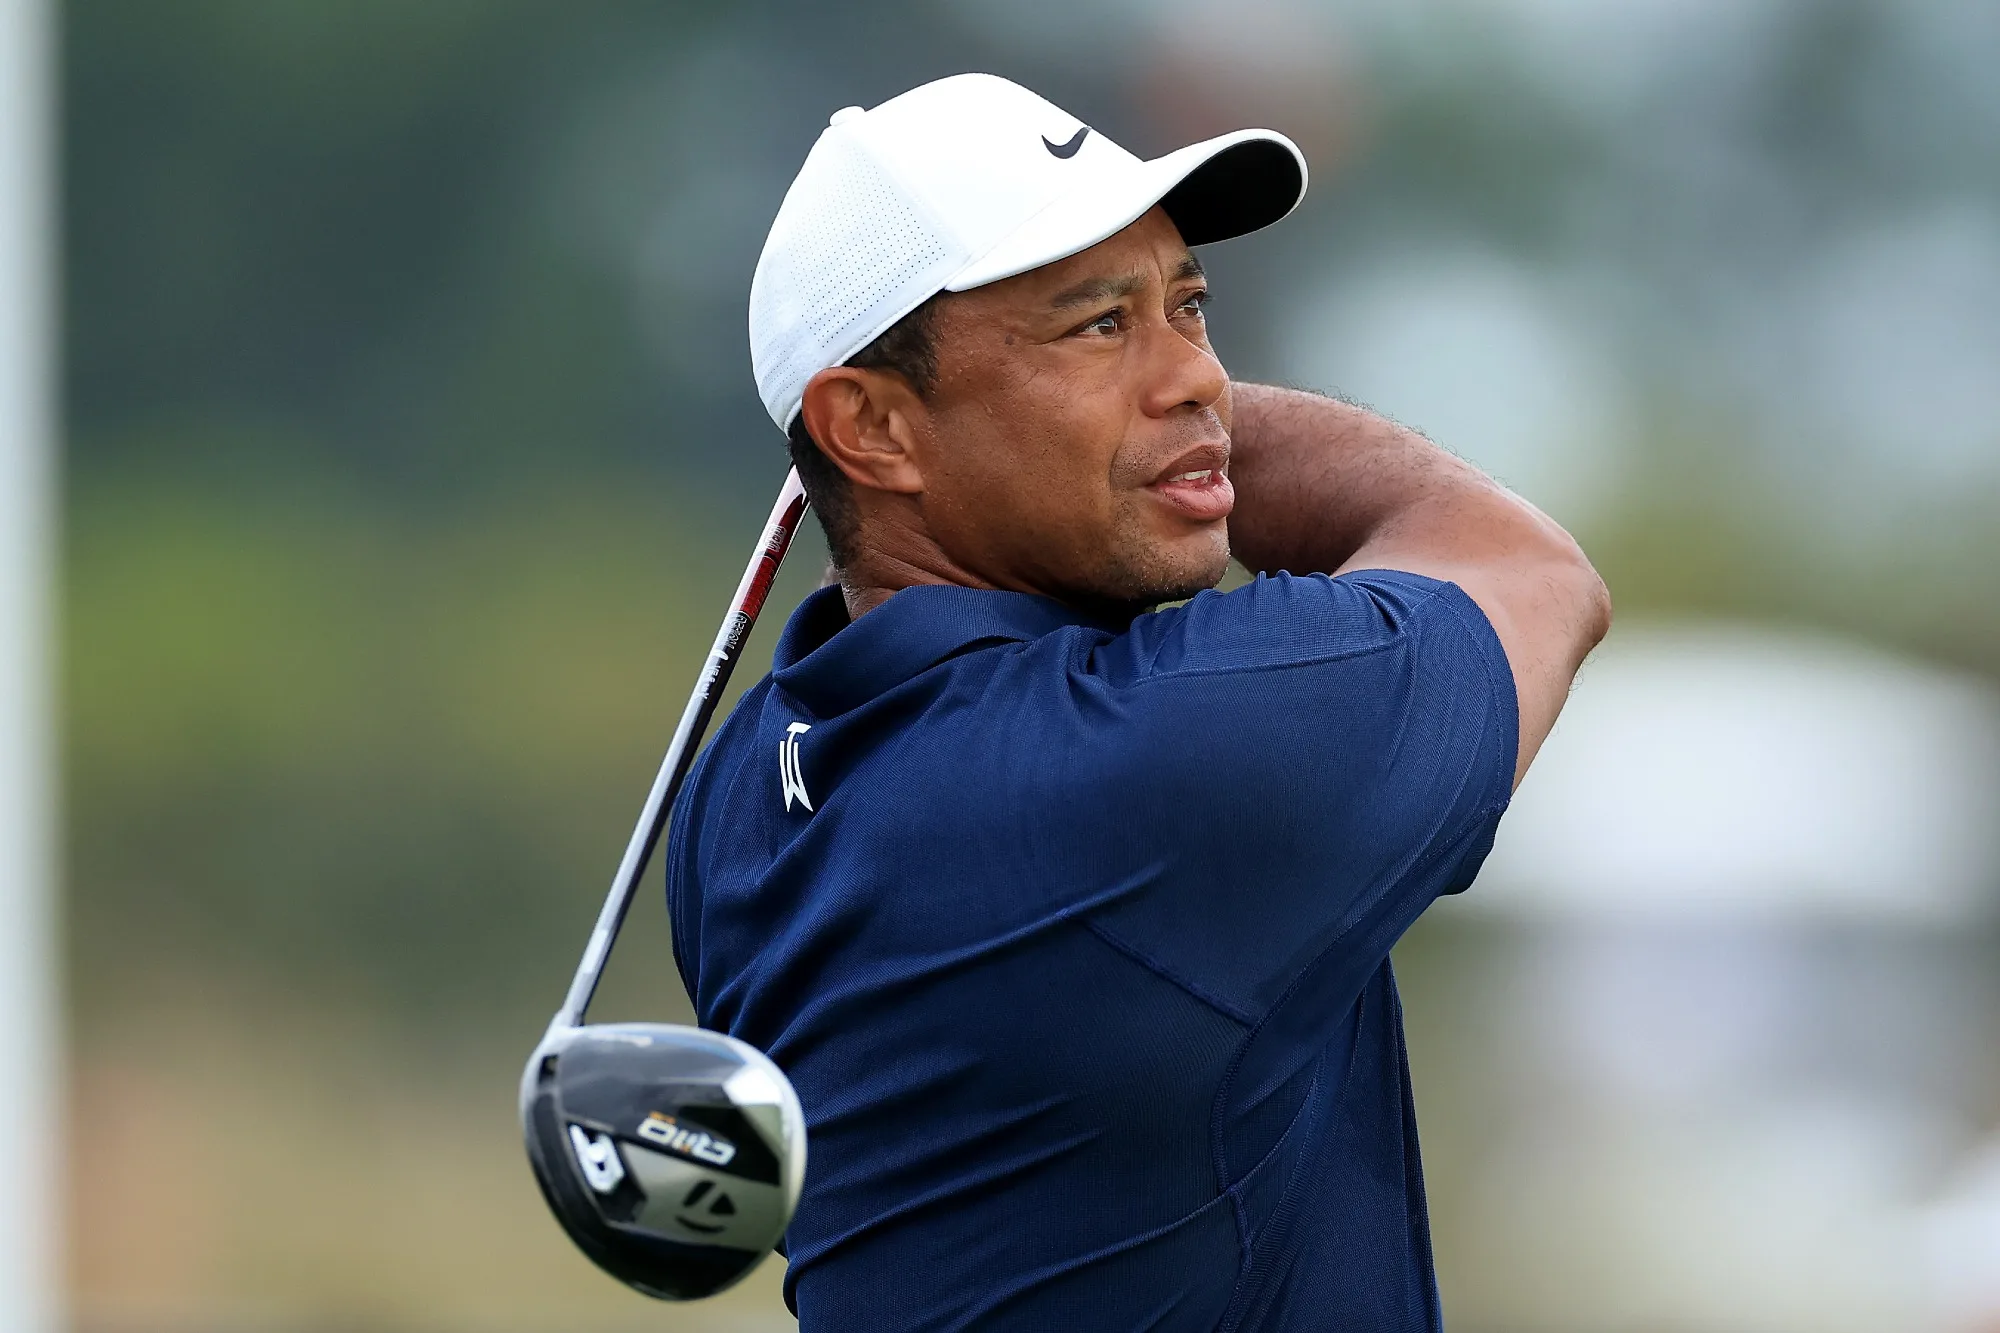 What driver does Tiger Woods use?